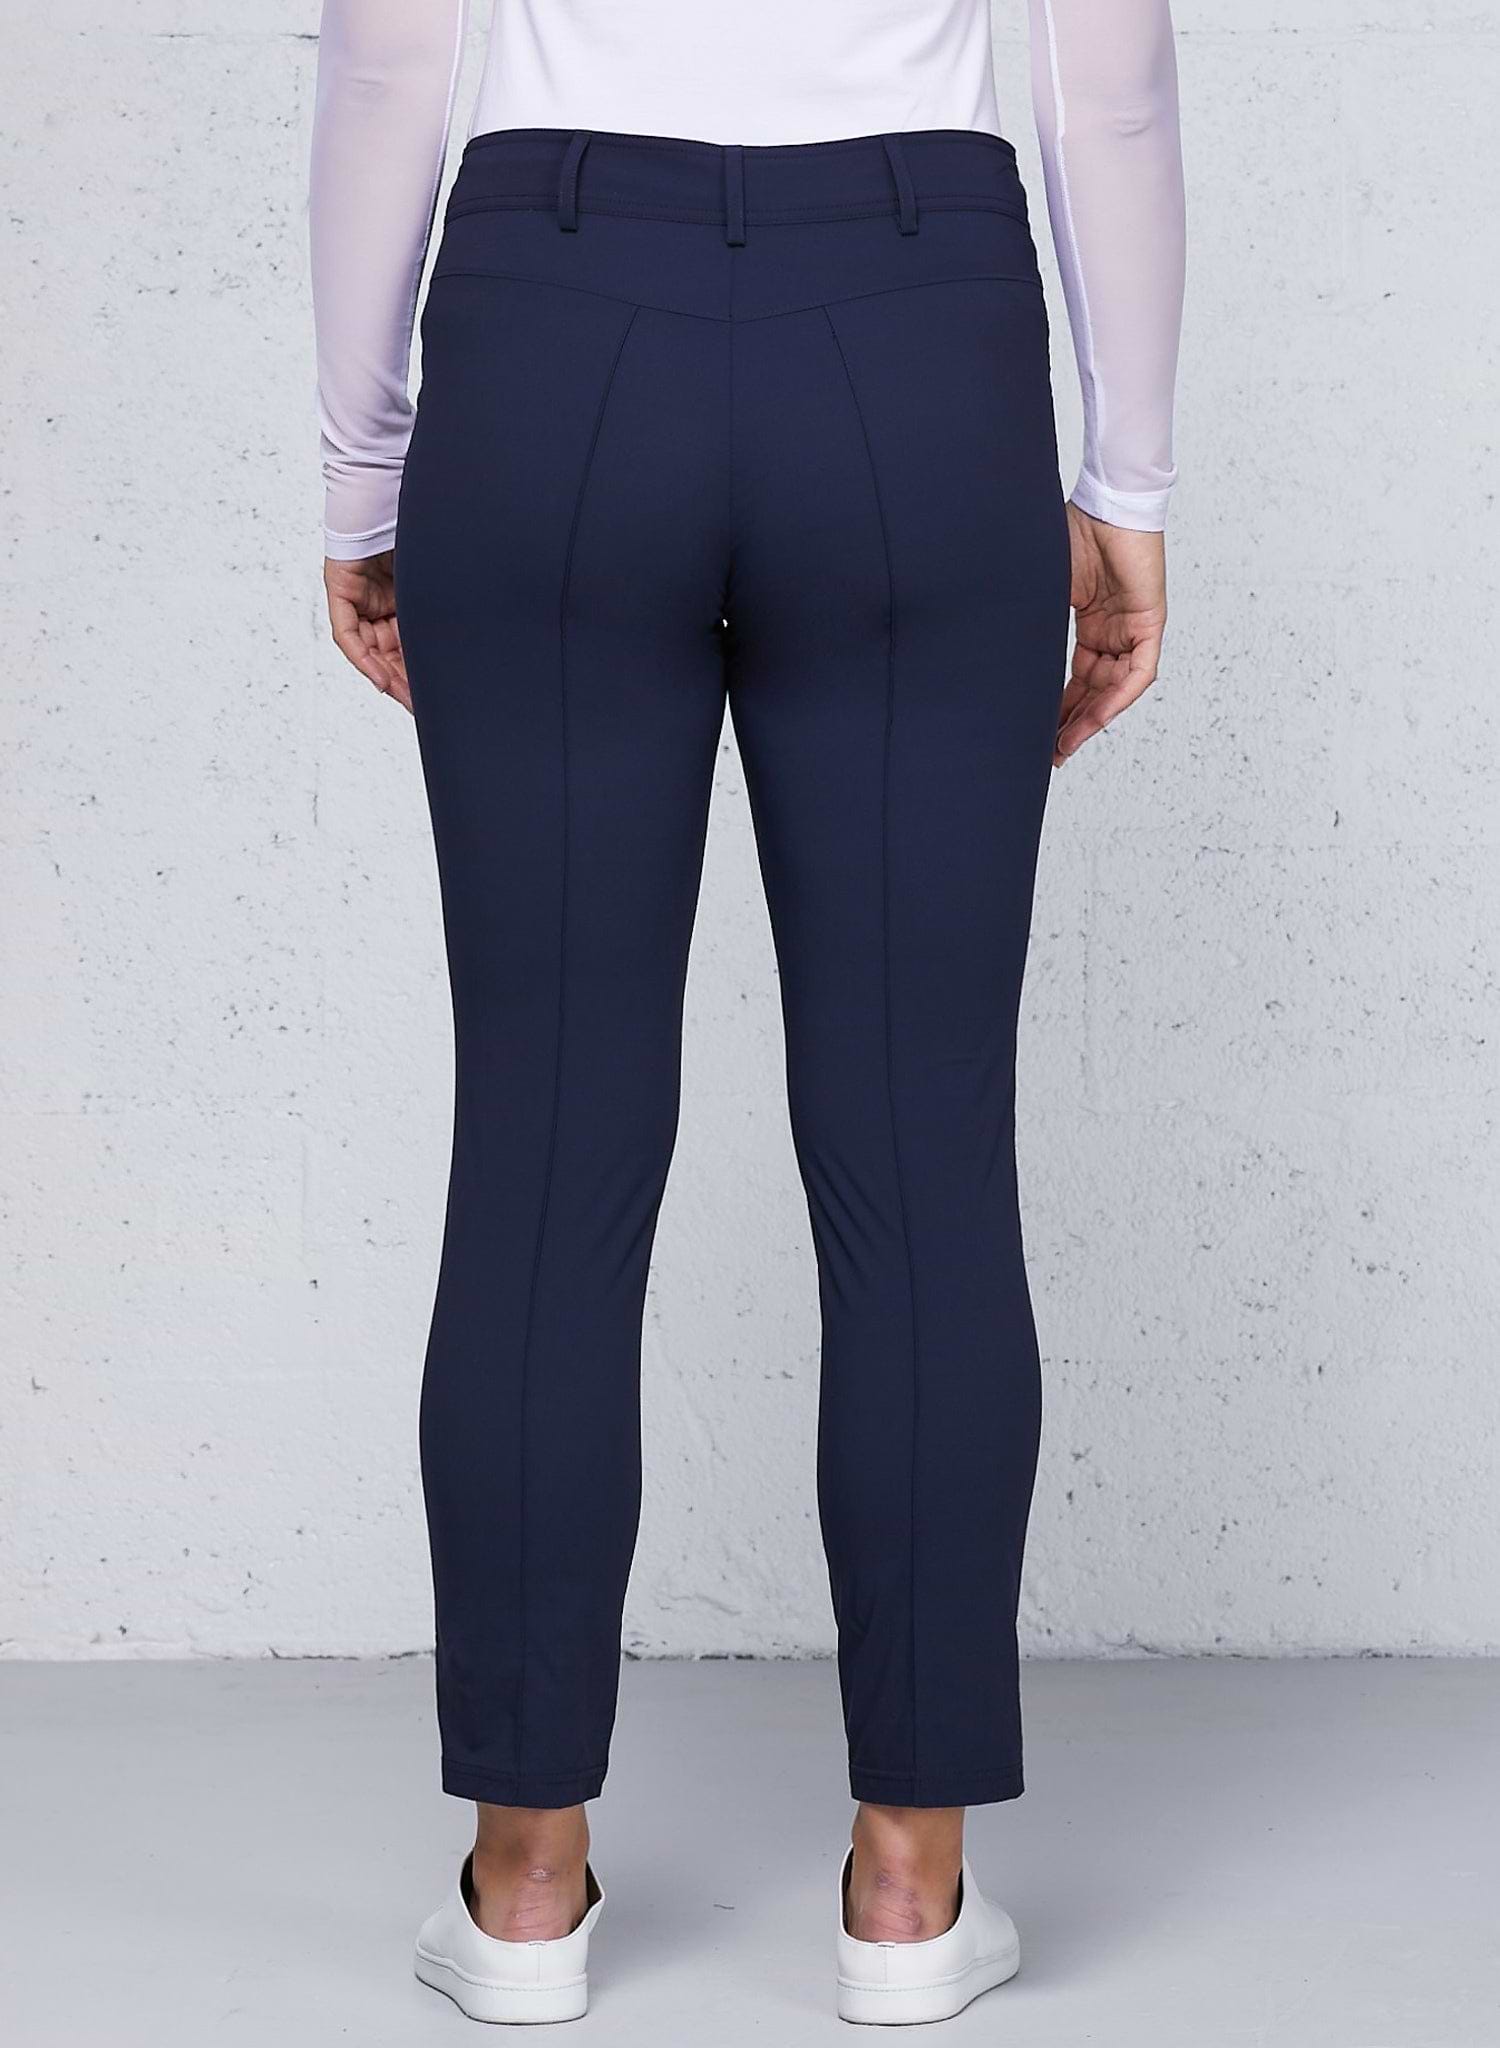 The Best Travel Pants. Back Profile of the Peggy Zippered Pant in Navy